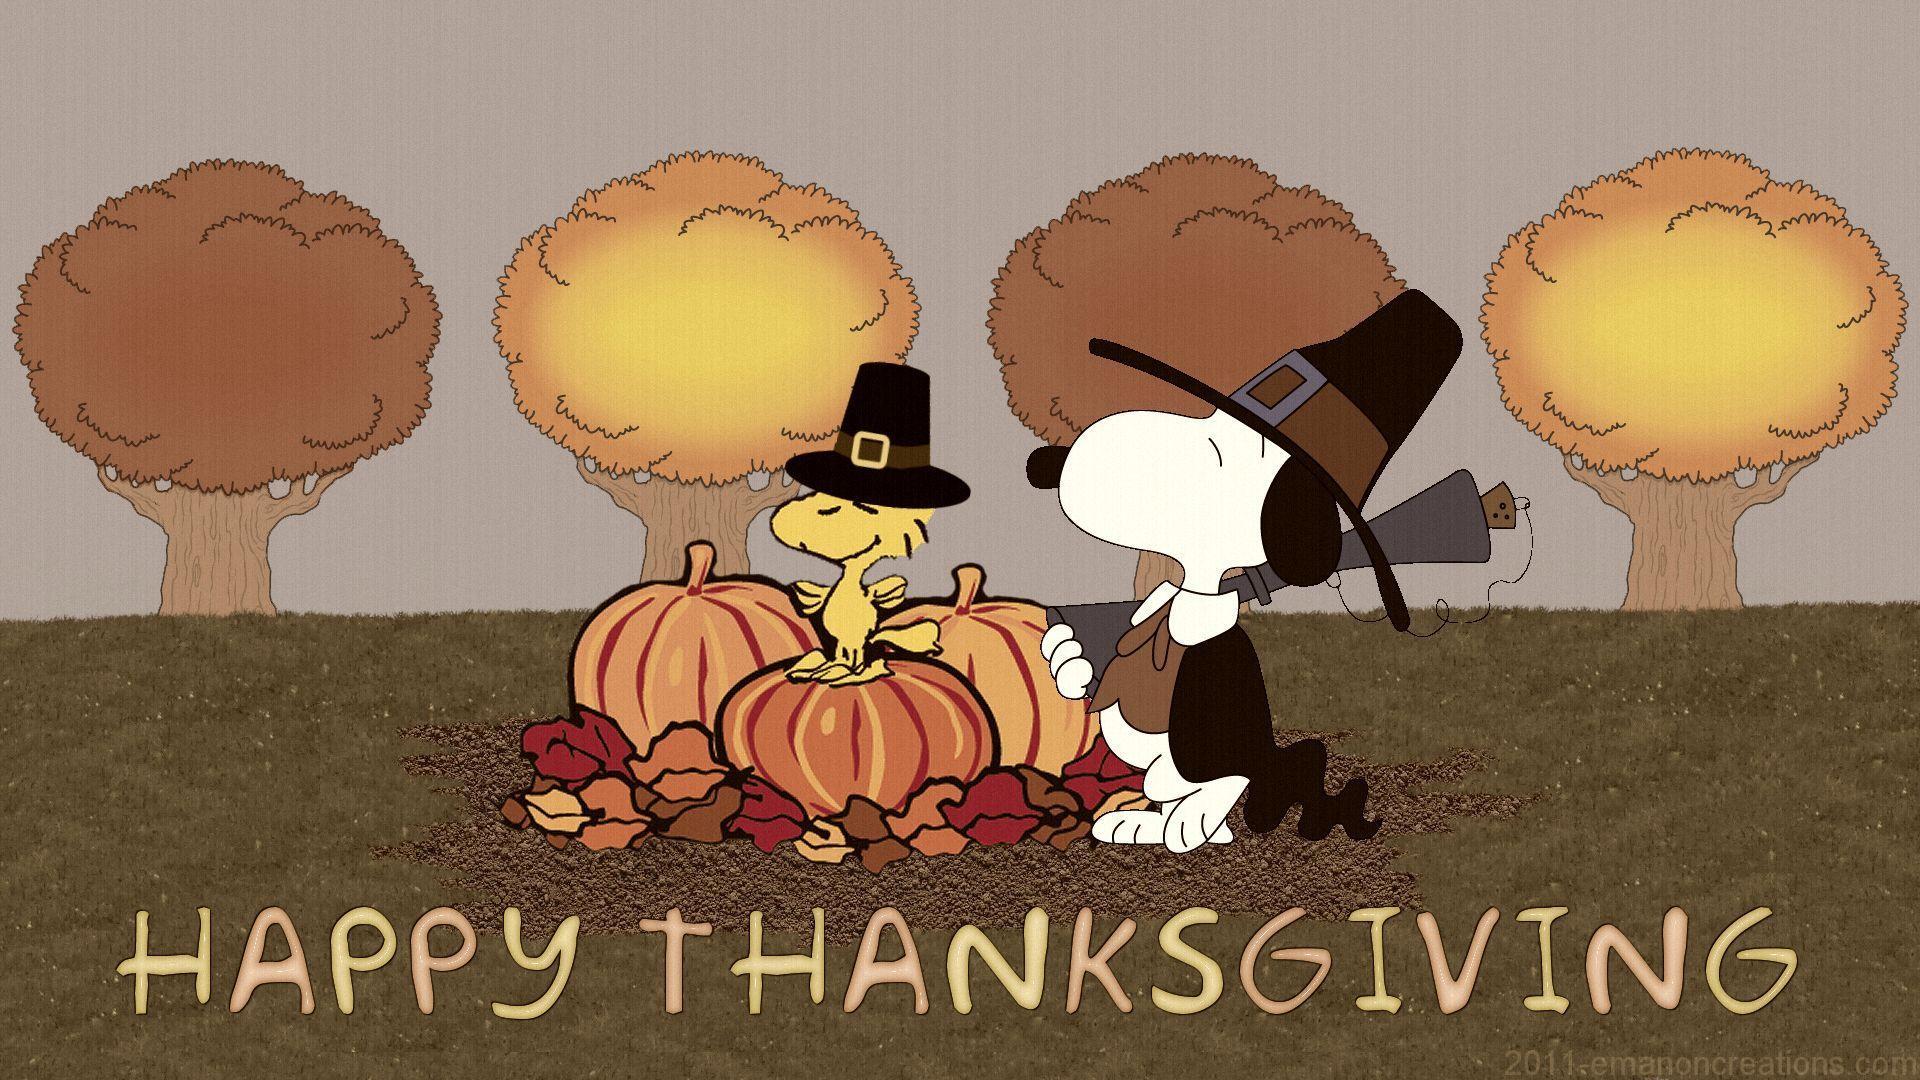 Funny Thanksgiving HD Wallpaper. Wallpaper, Background, Image